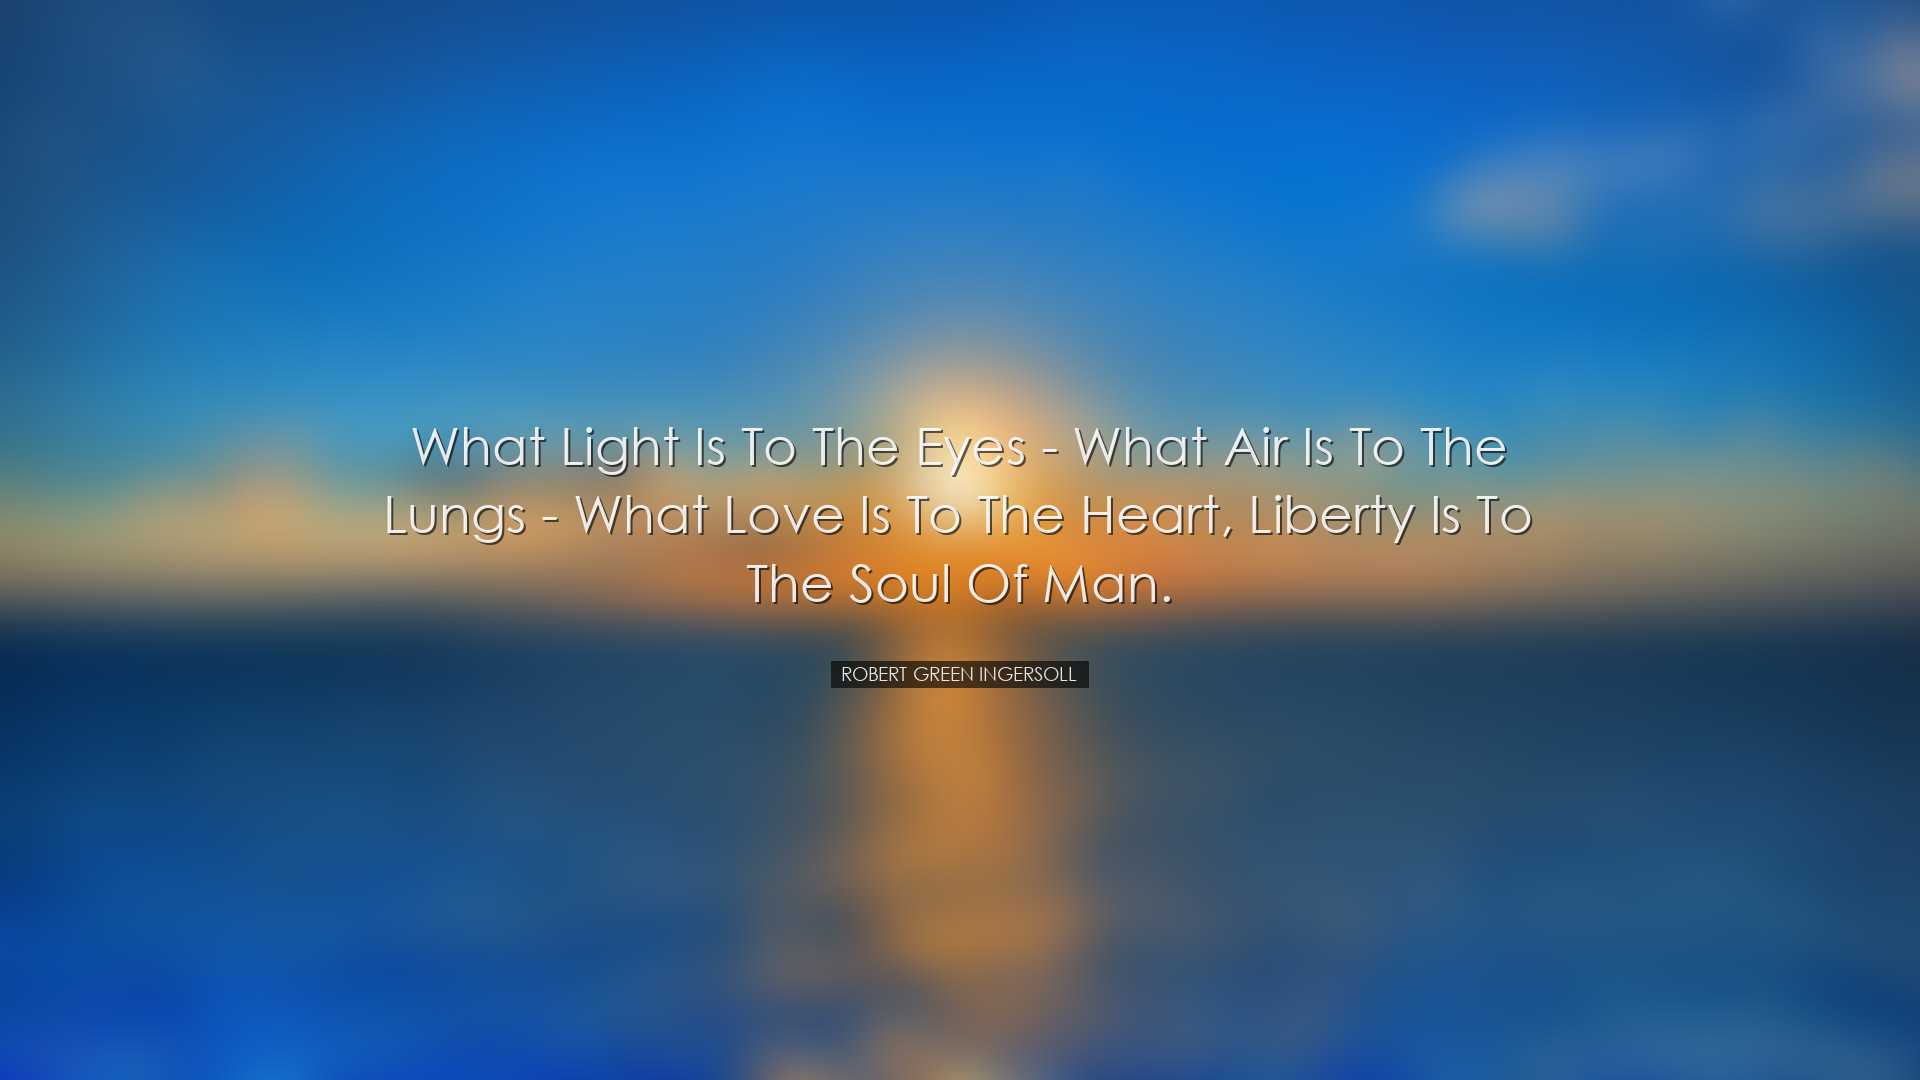 What light is to the eyes - what air is to the lungs - what love i